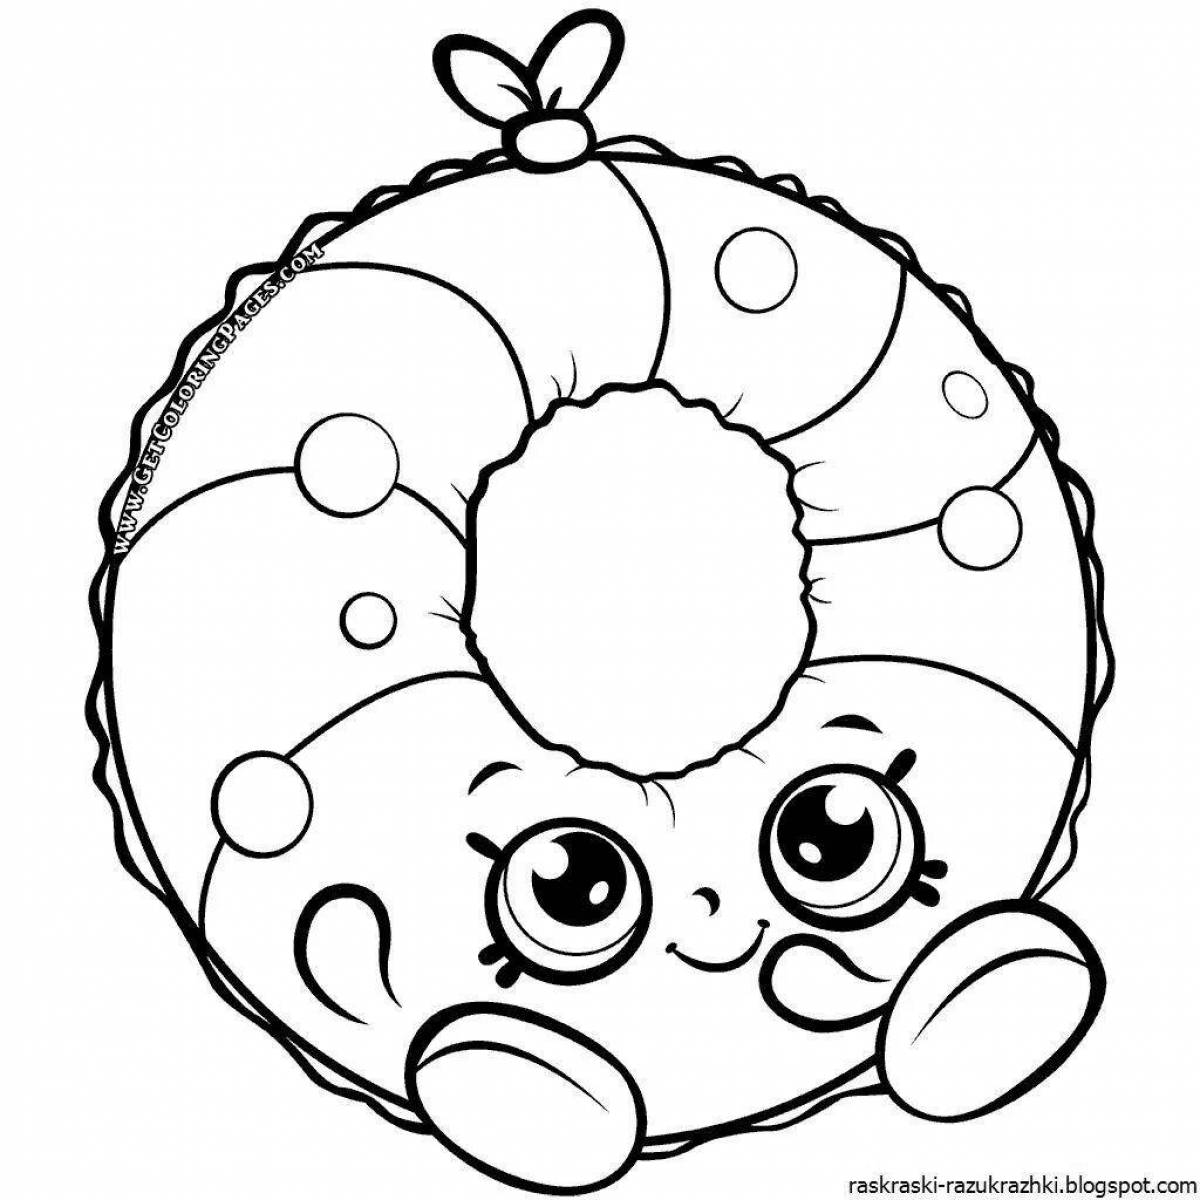 Sweet donut coloring page for kids